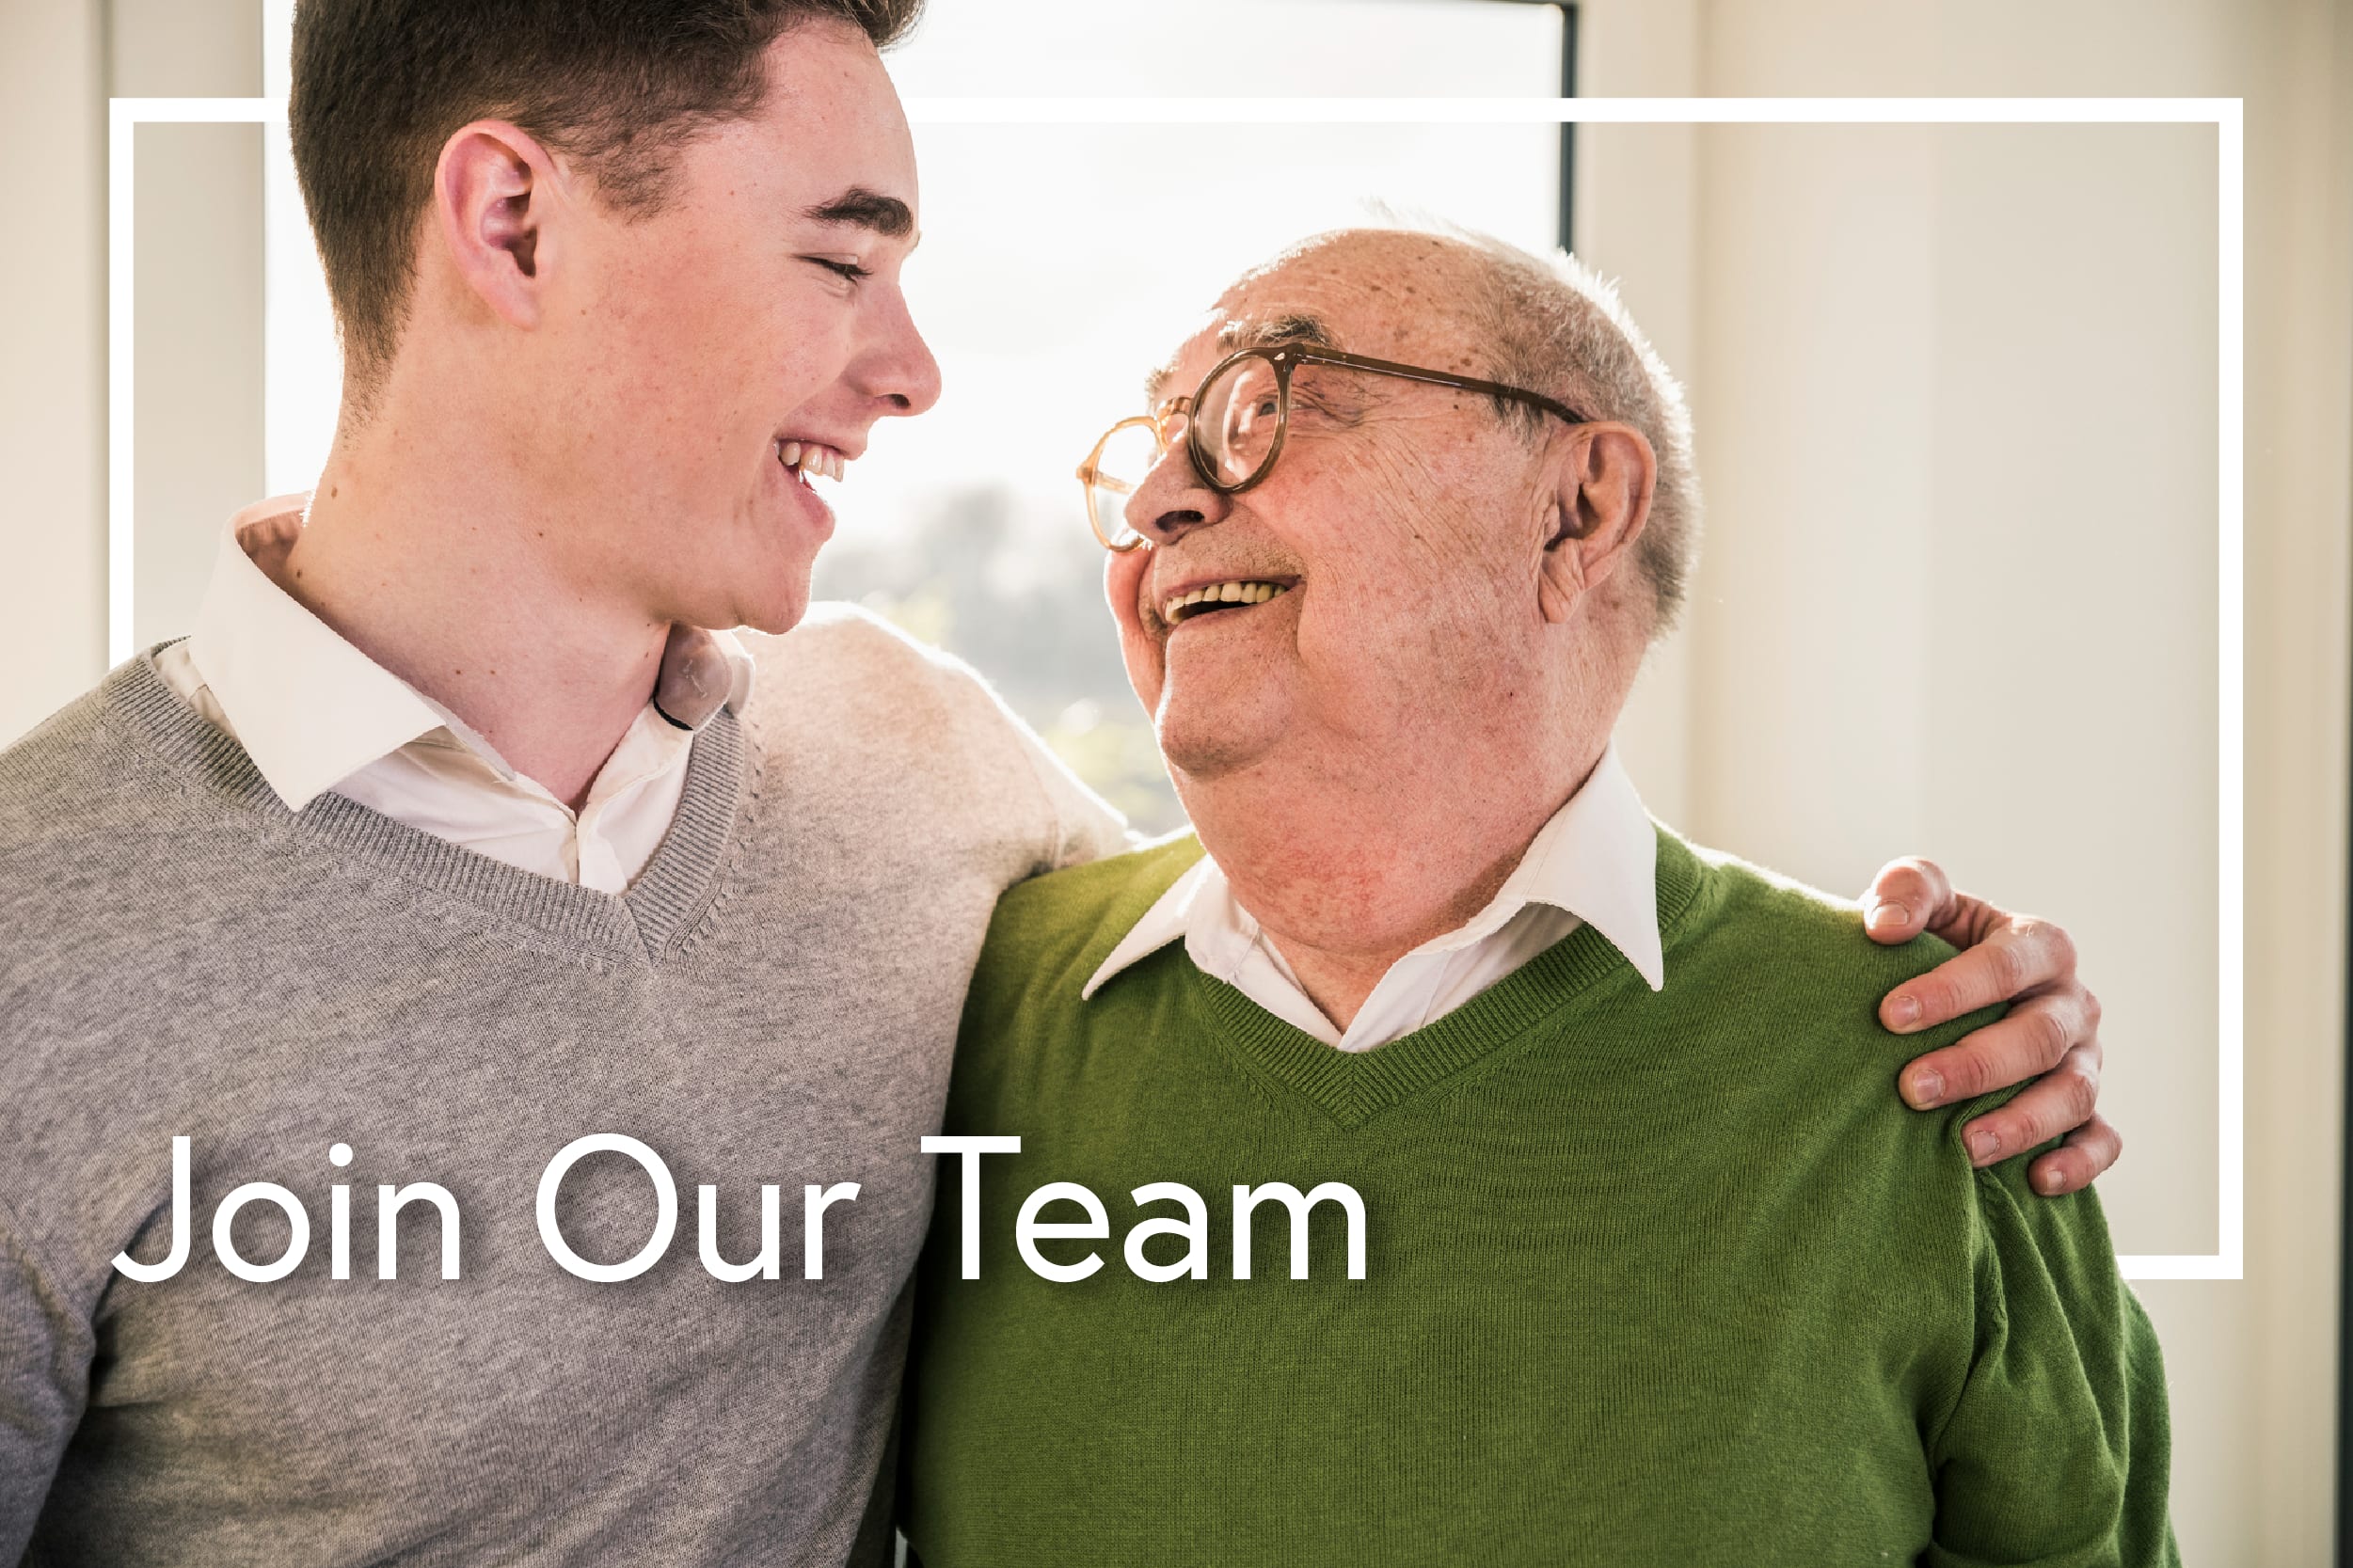 Join our team at Heritage Senior Living